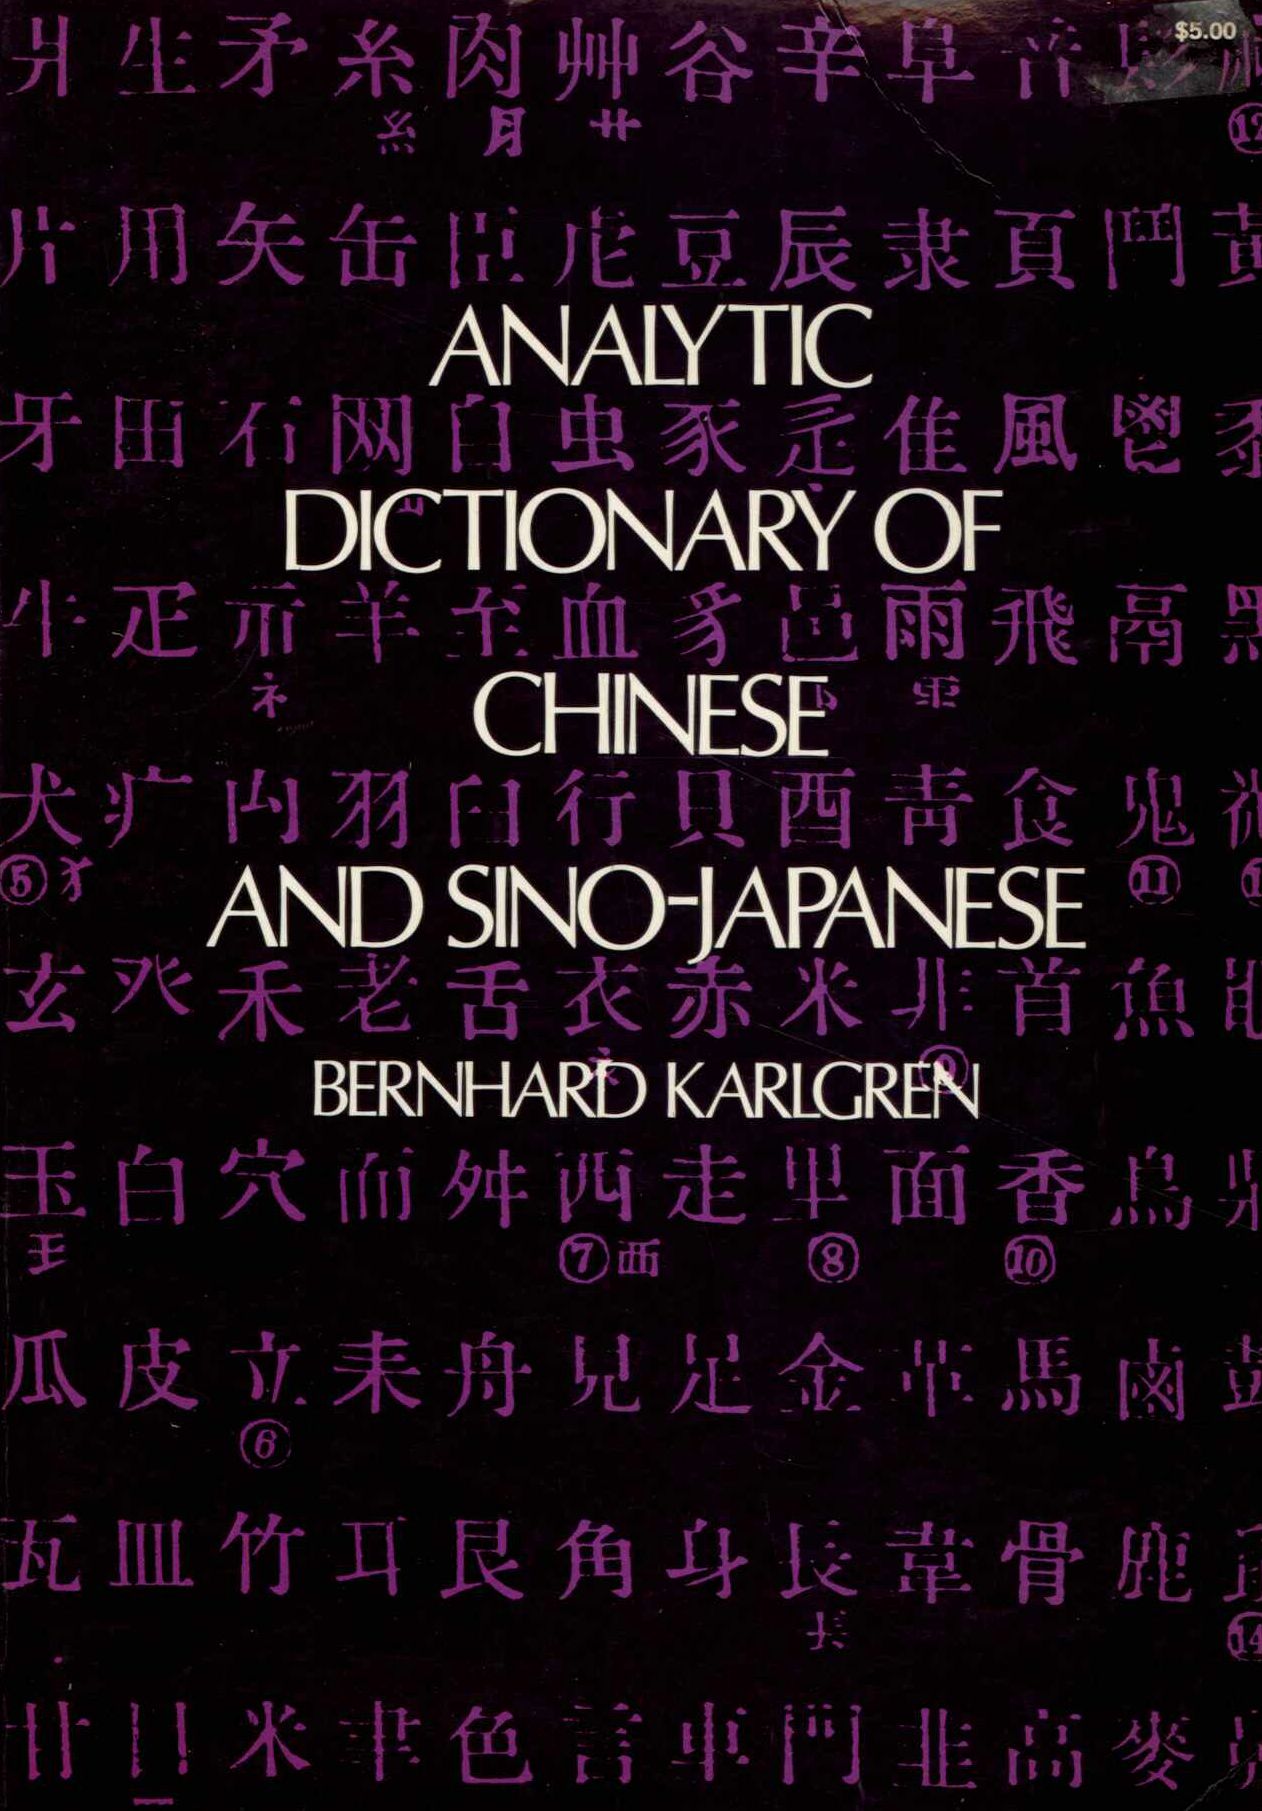 Analytic dictionary of Chinese and sino-japanese